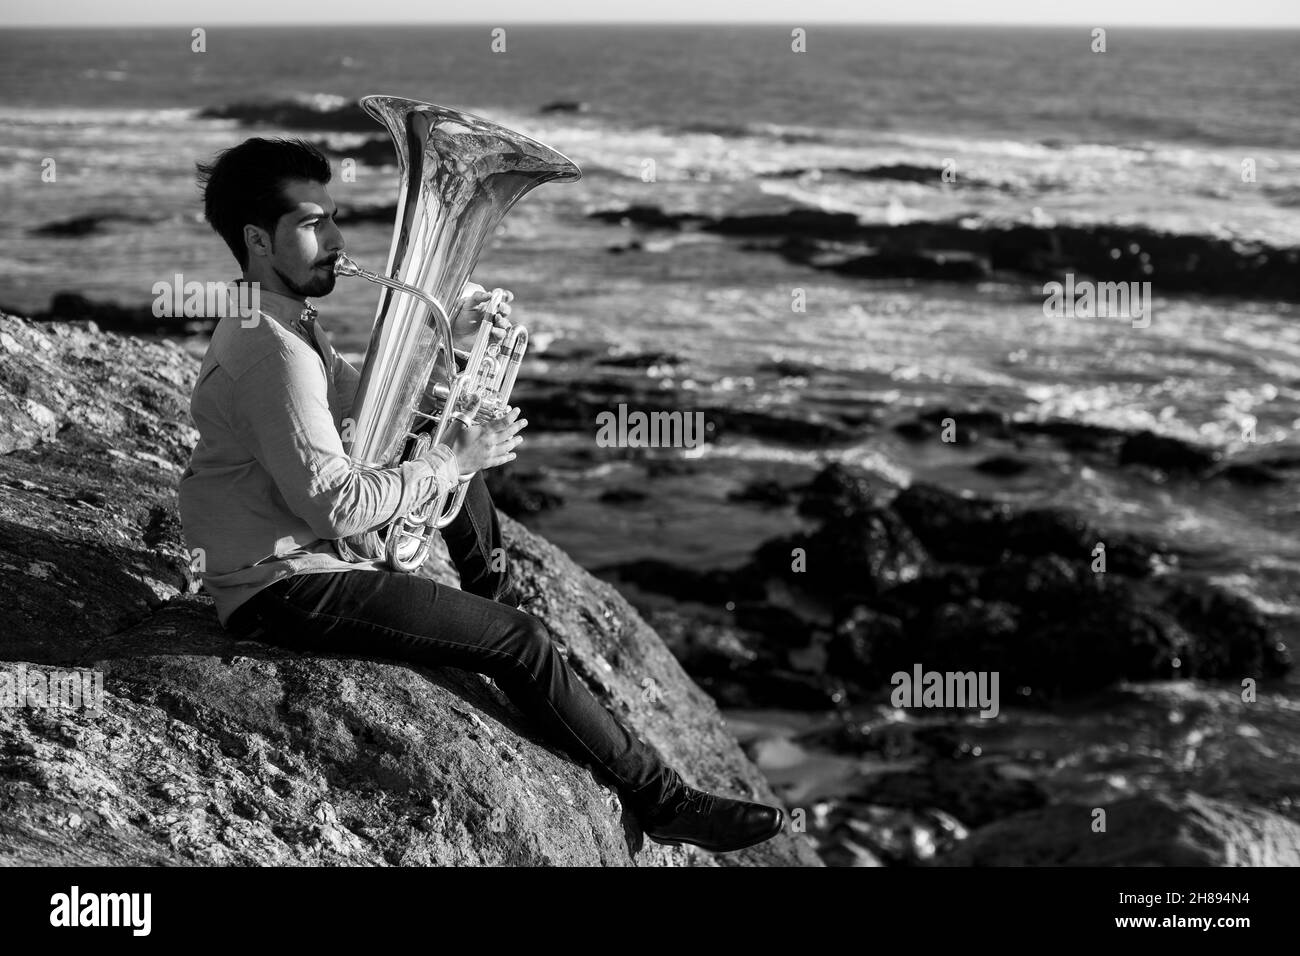 Musician sitting on the rocks with a tuba on the ocean shore. Black and white photo. Stock Photo